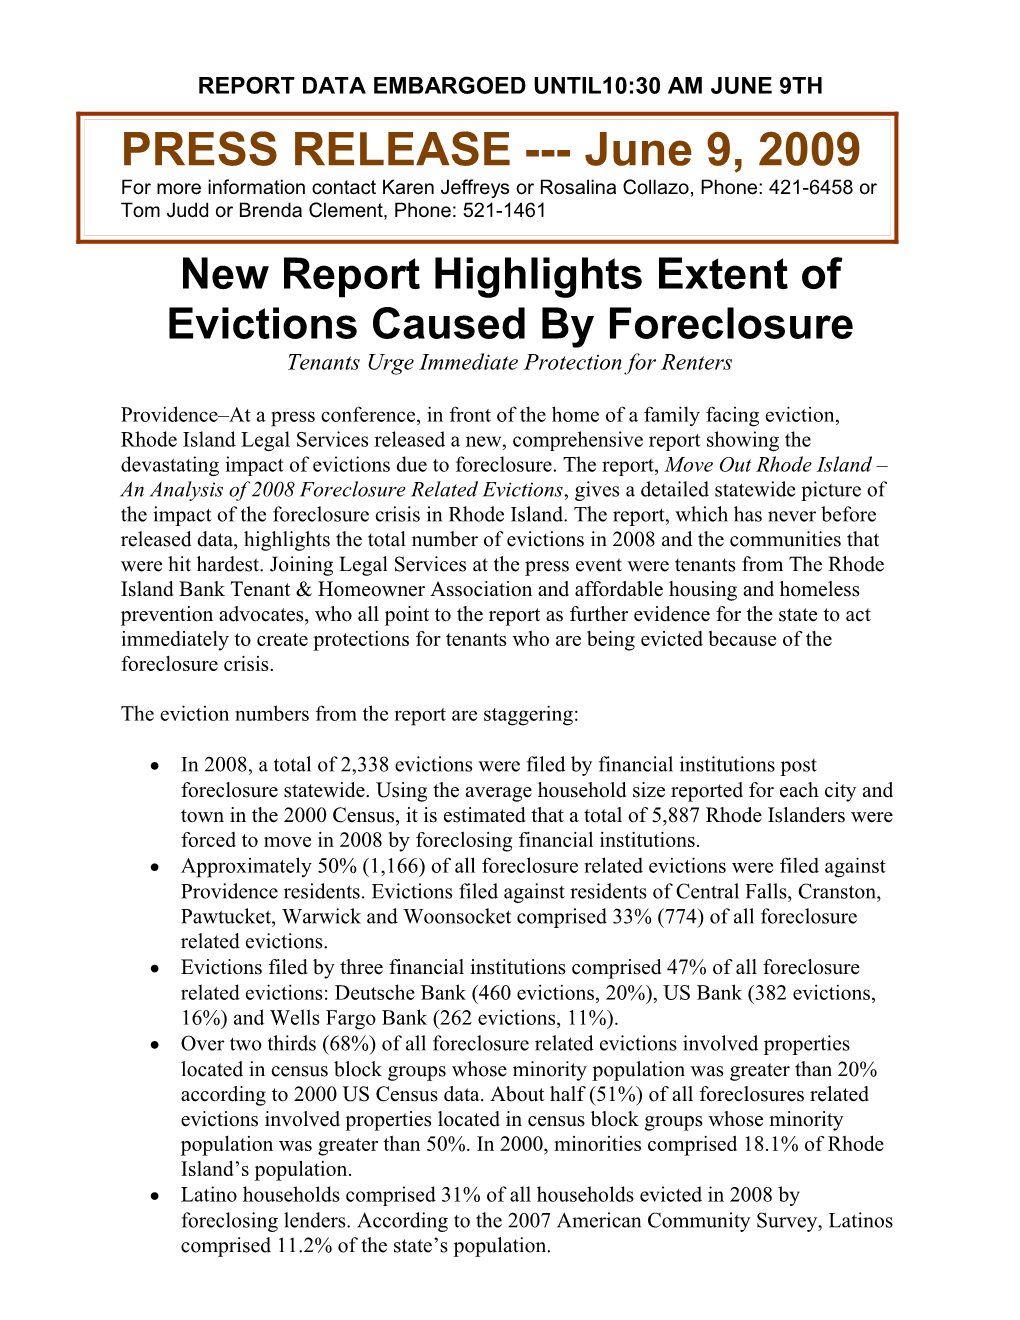 Page 3 . . . New Report Highlights Extent of Evictions